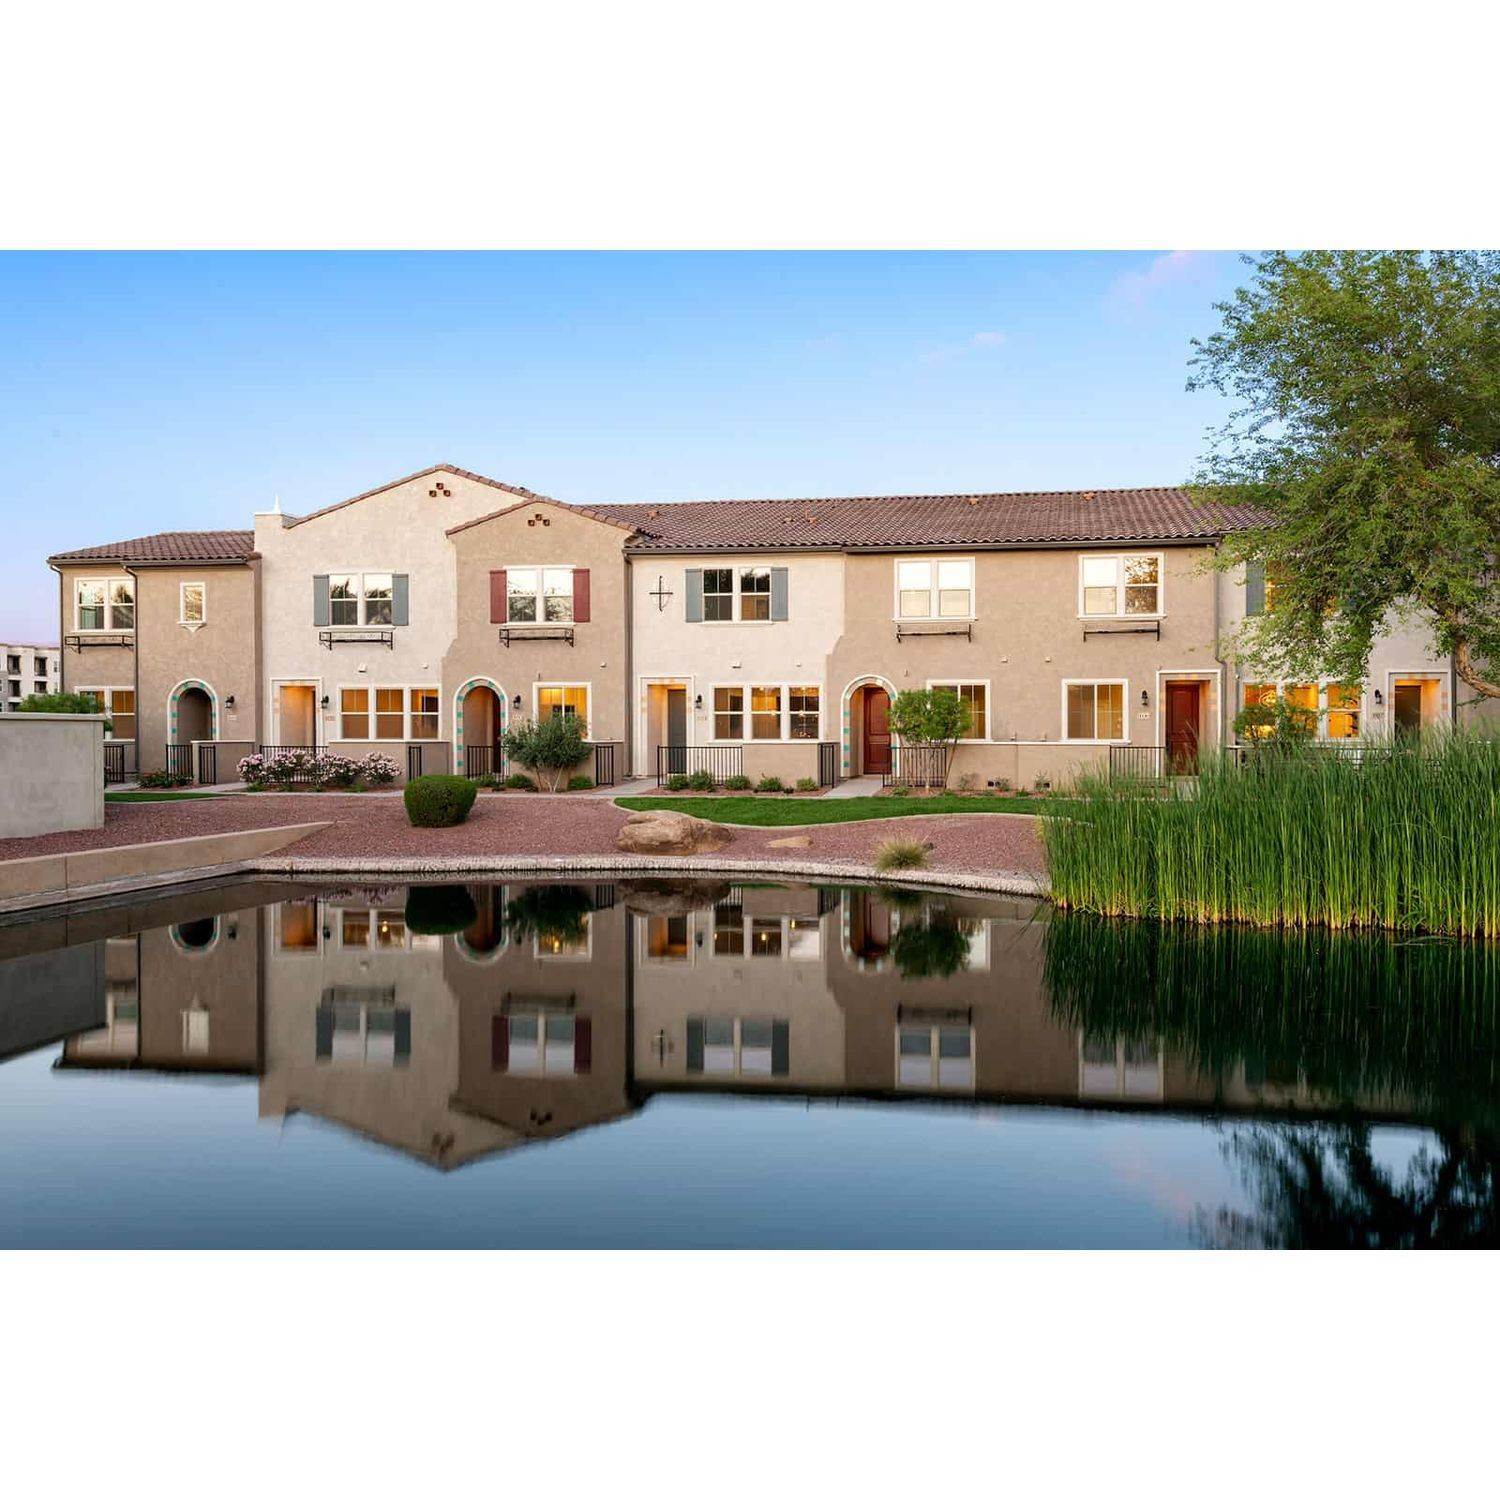 4. 2660 S. Equestrian Dr. #110, Gilbert, AZ 85295에 The Towns at Annecy 건물